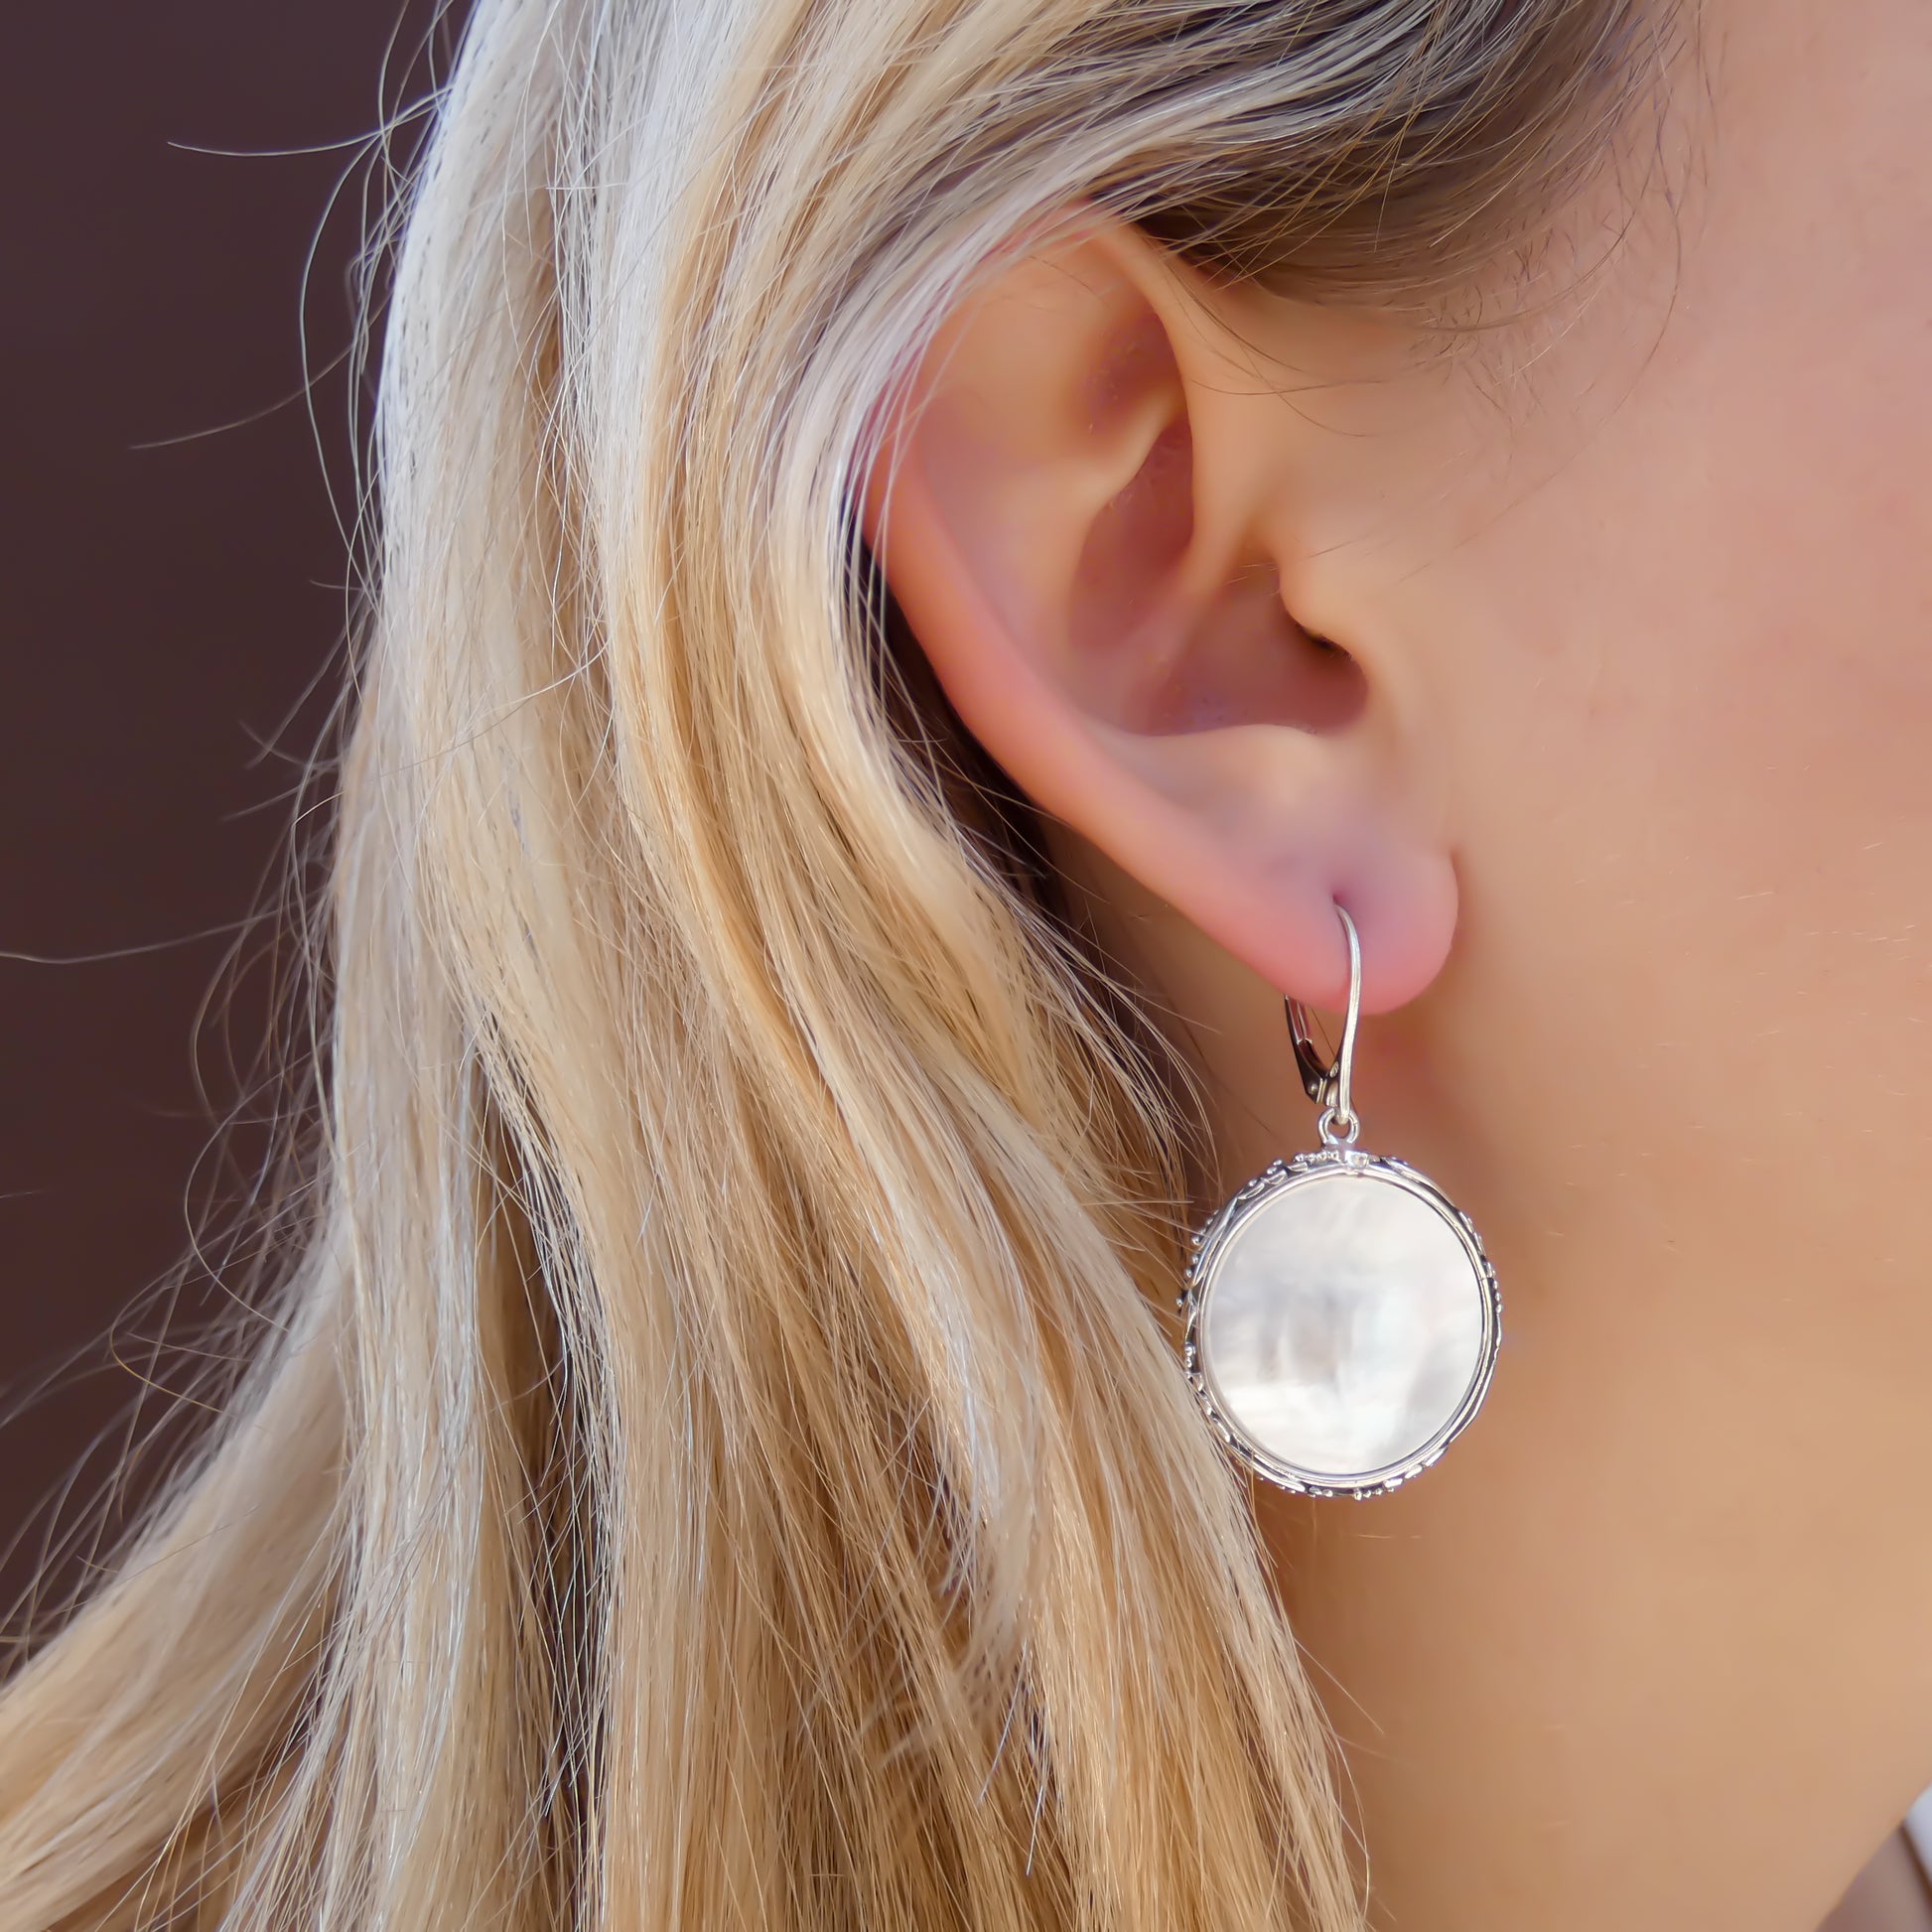 Woman wearing silver filigree and bead earrings with round mother of pearl discs.